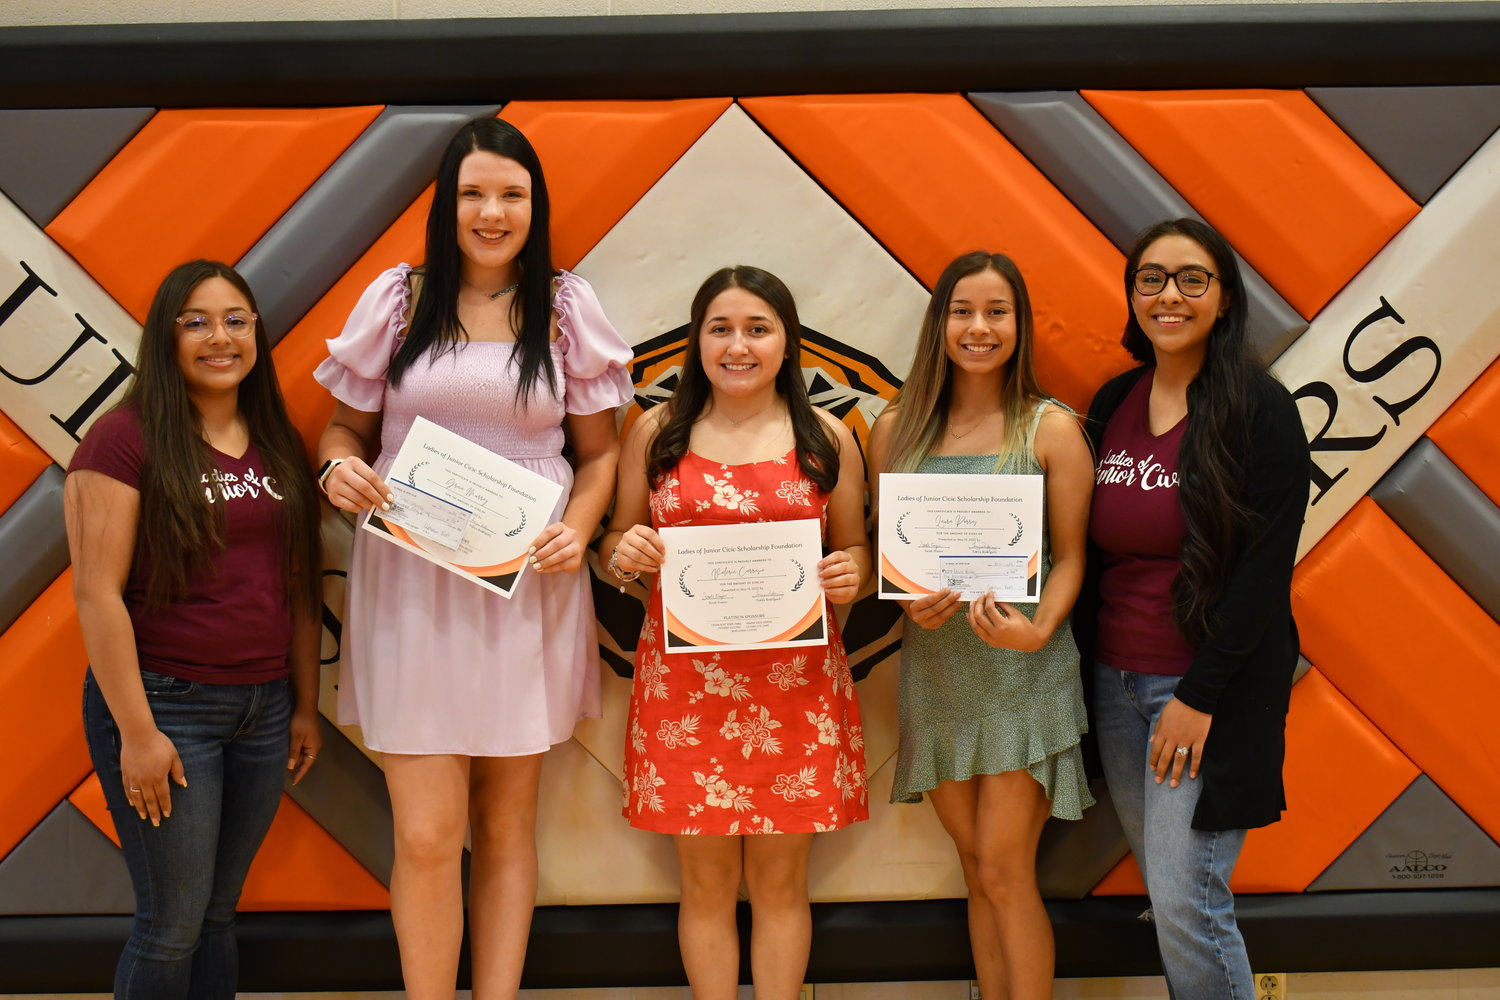 Senior Awards — Grace Murray, Valeria Carrasco, and Laura Porras were given the Ulysses Jr. Civic Scholarship for Women of Community Service from Sarah Frazee and Tonya Rodriguez on Friday, May 13, 2022.